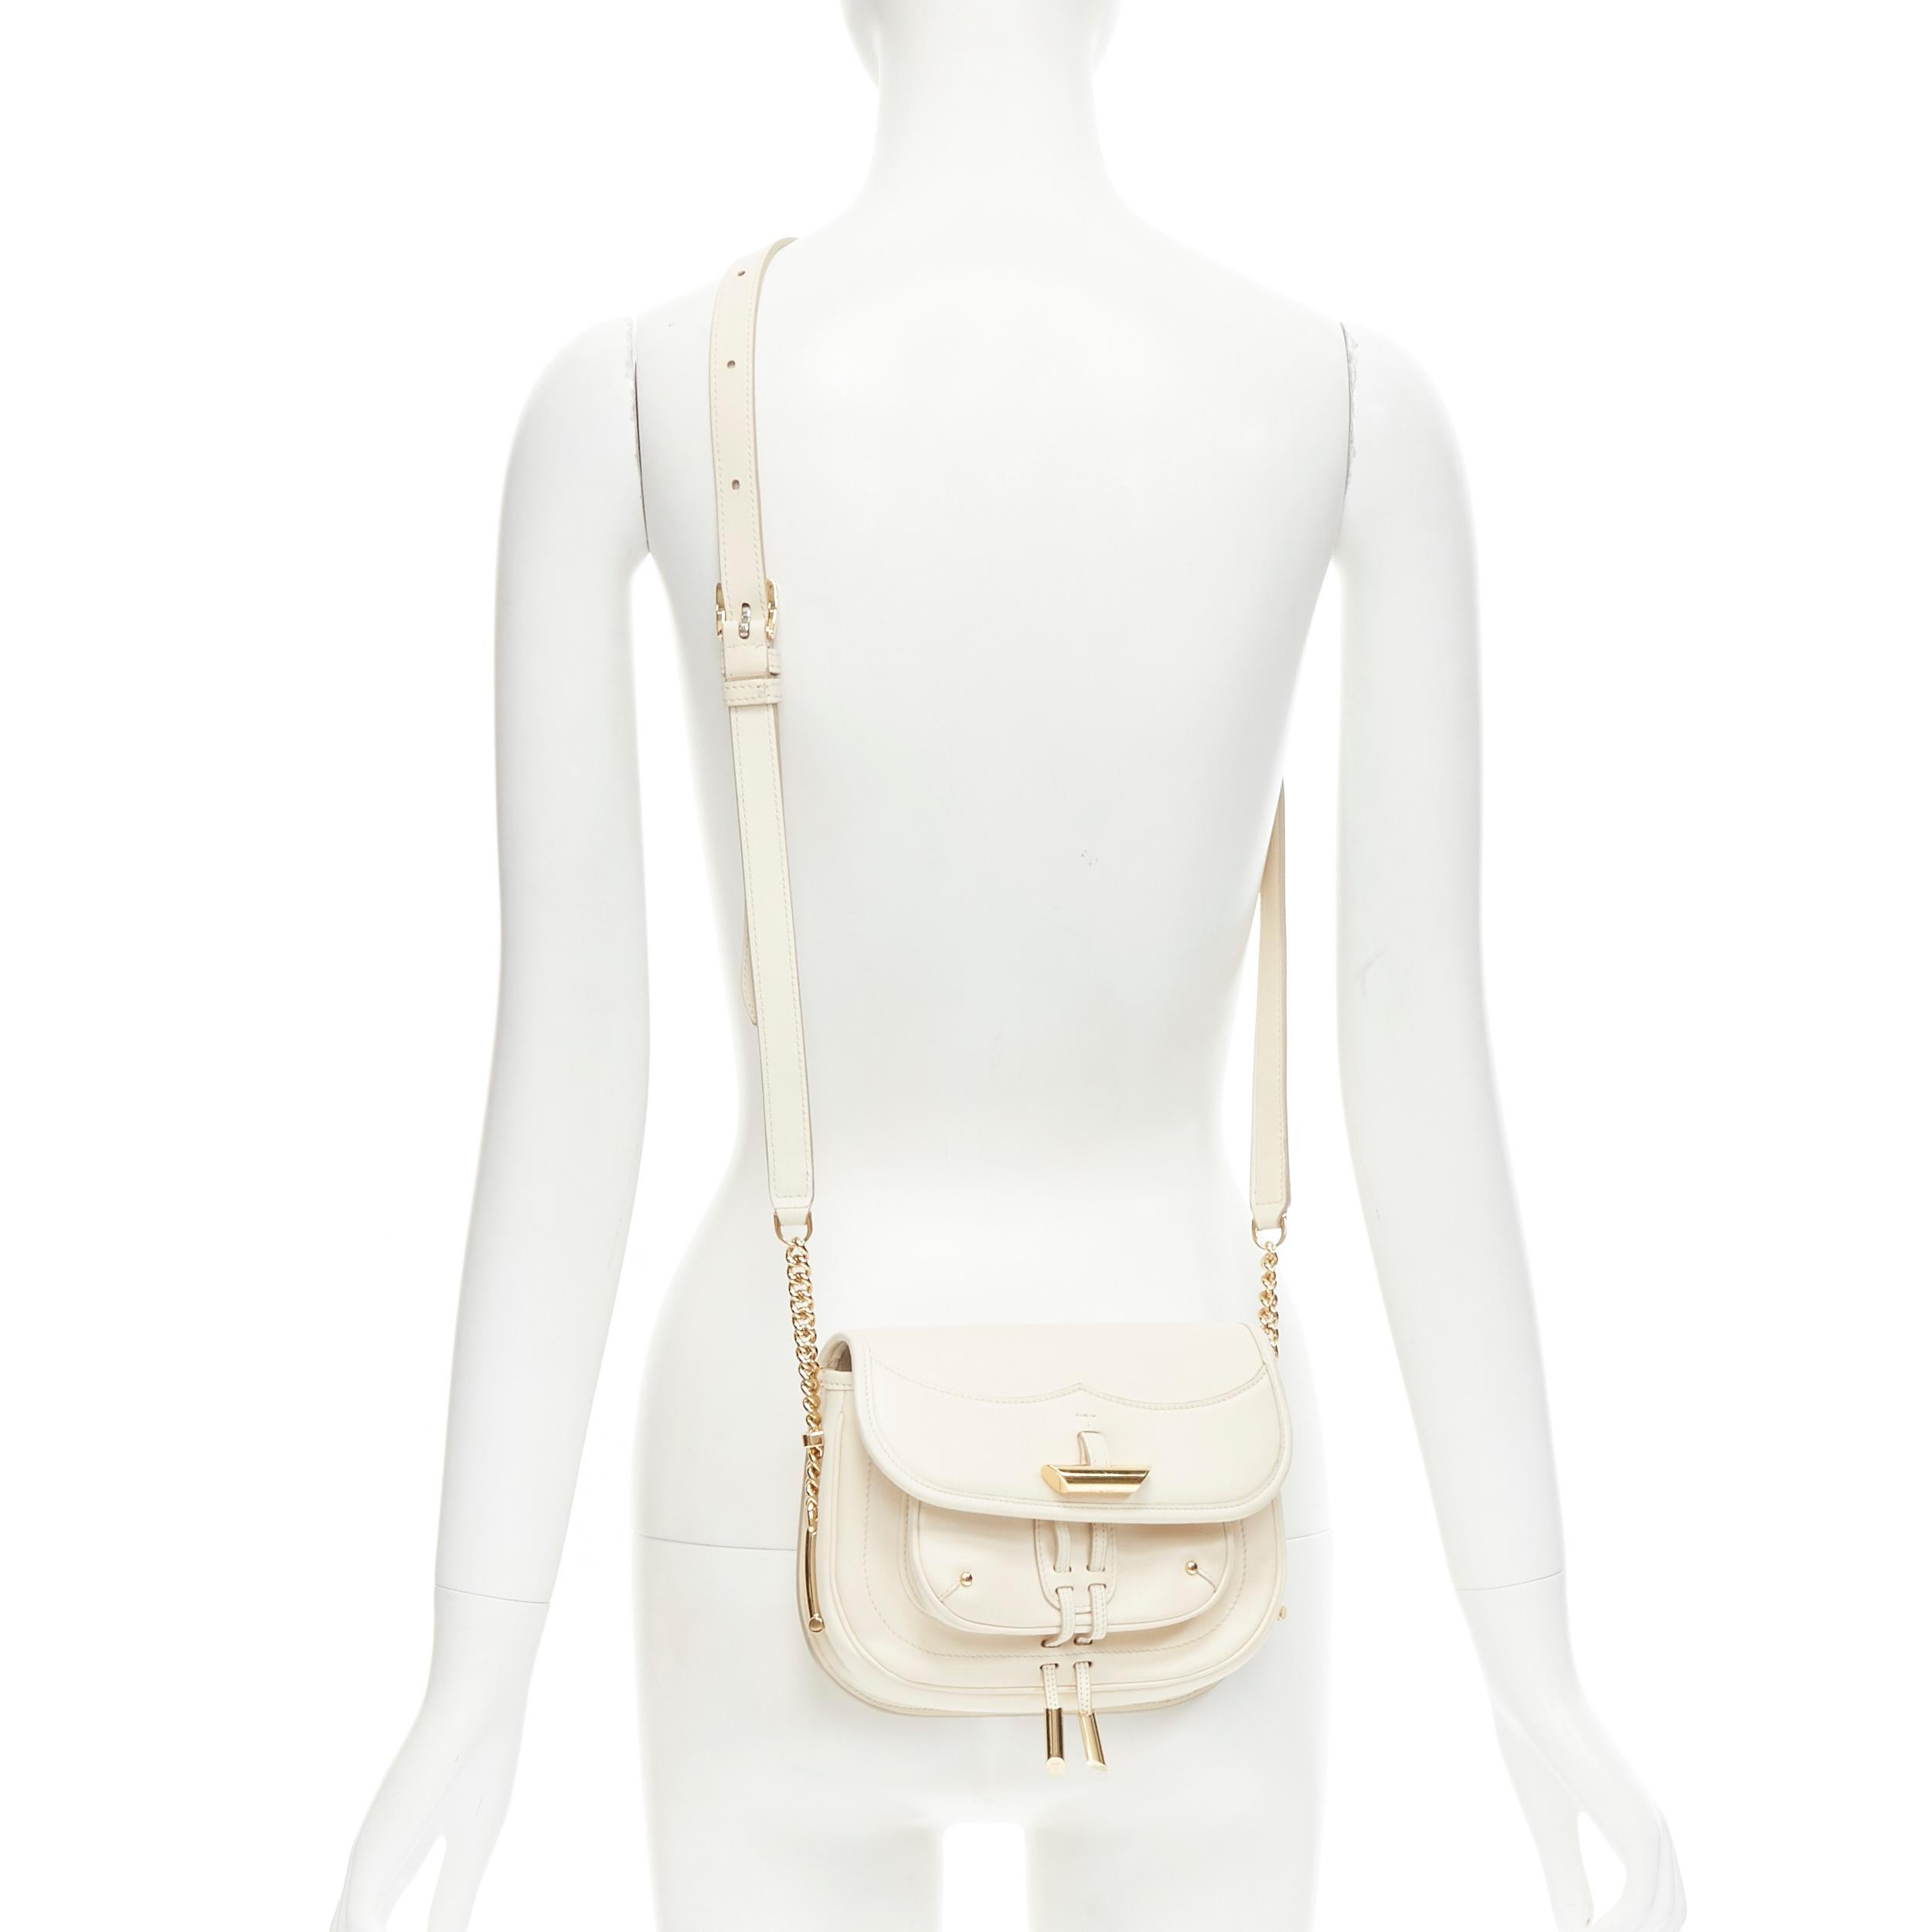 TOD's Fiocco cream beige gold toggle hardware crossbody saddle bag 
Reference: MAWG/A00062 
Brand: Tod's 
Model: Fiocco 
Material: Leather 
Color: Cream 
Pattern: Solid 
Closure: Magnet 
Extra Detail: Cream leather with gold-tone hardware. Gold-tone